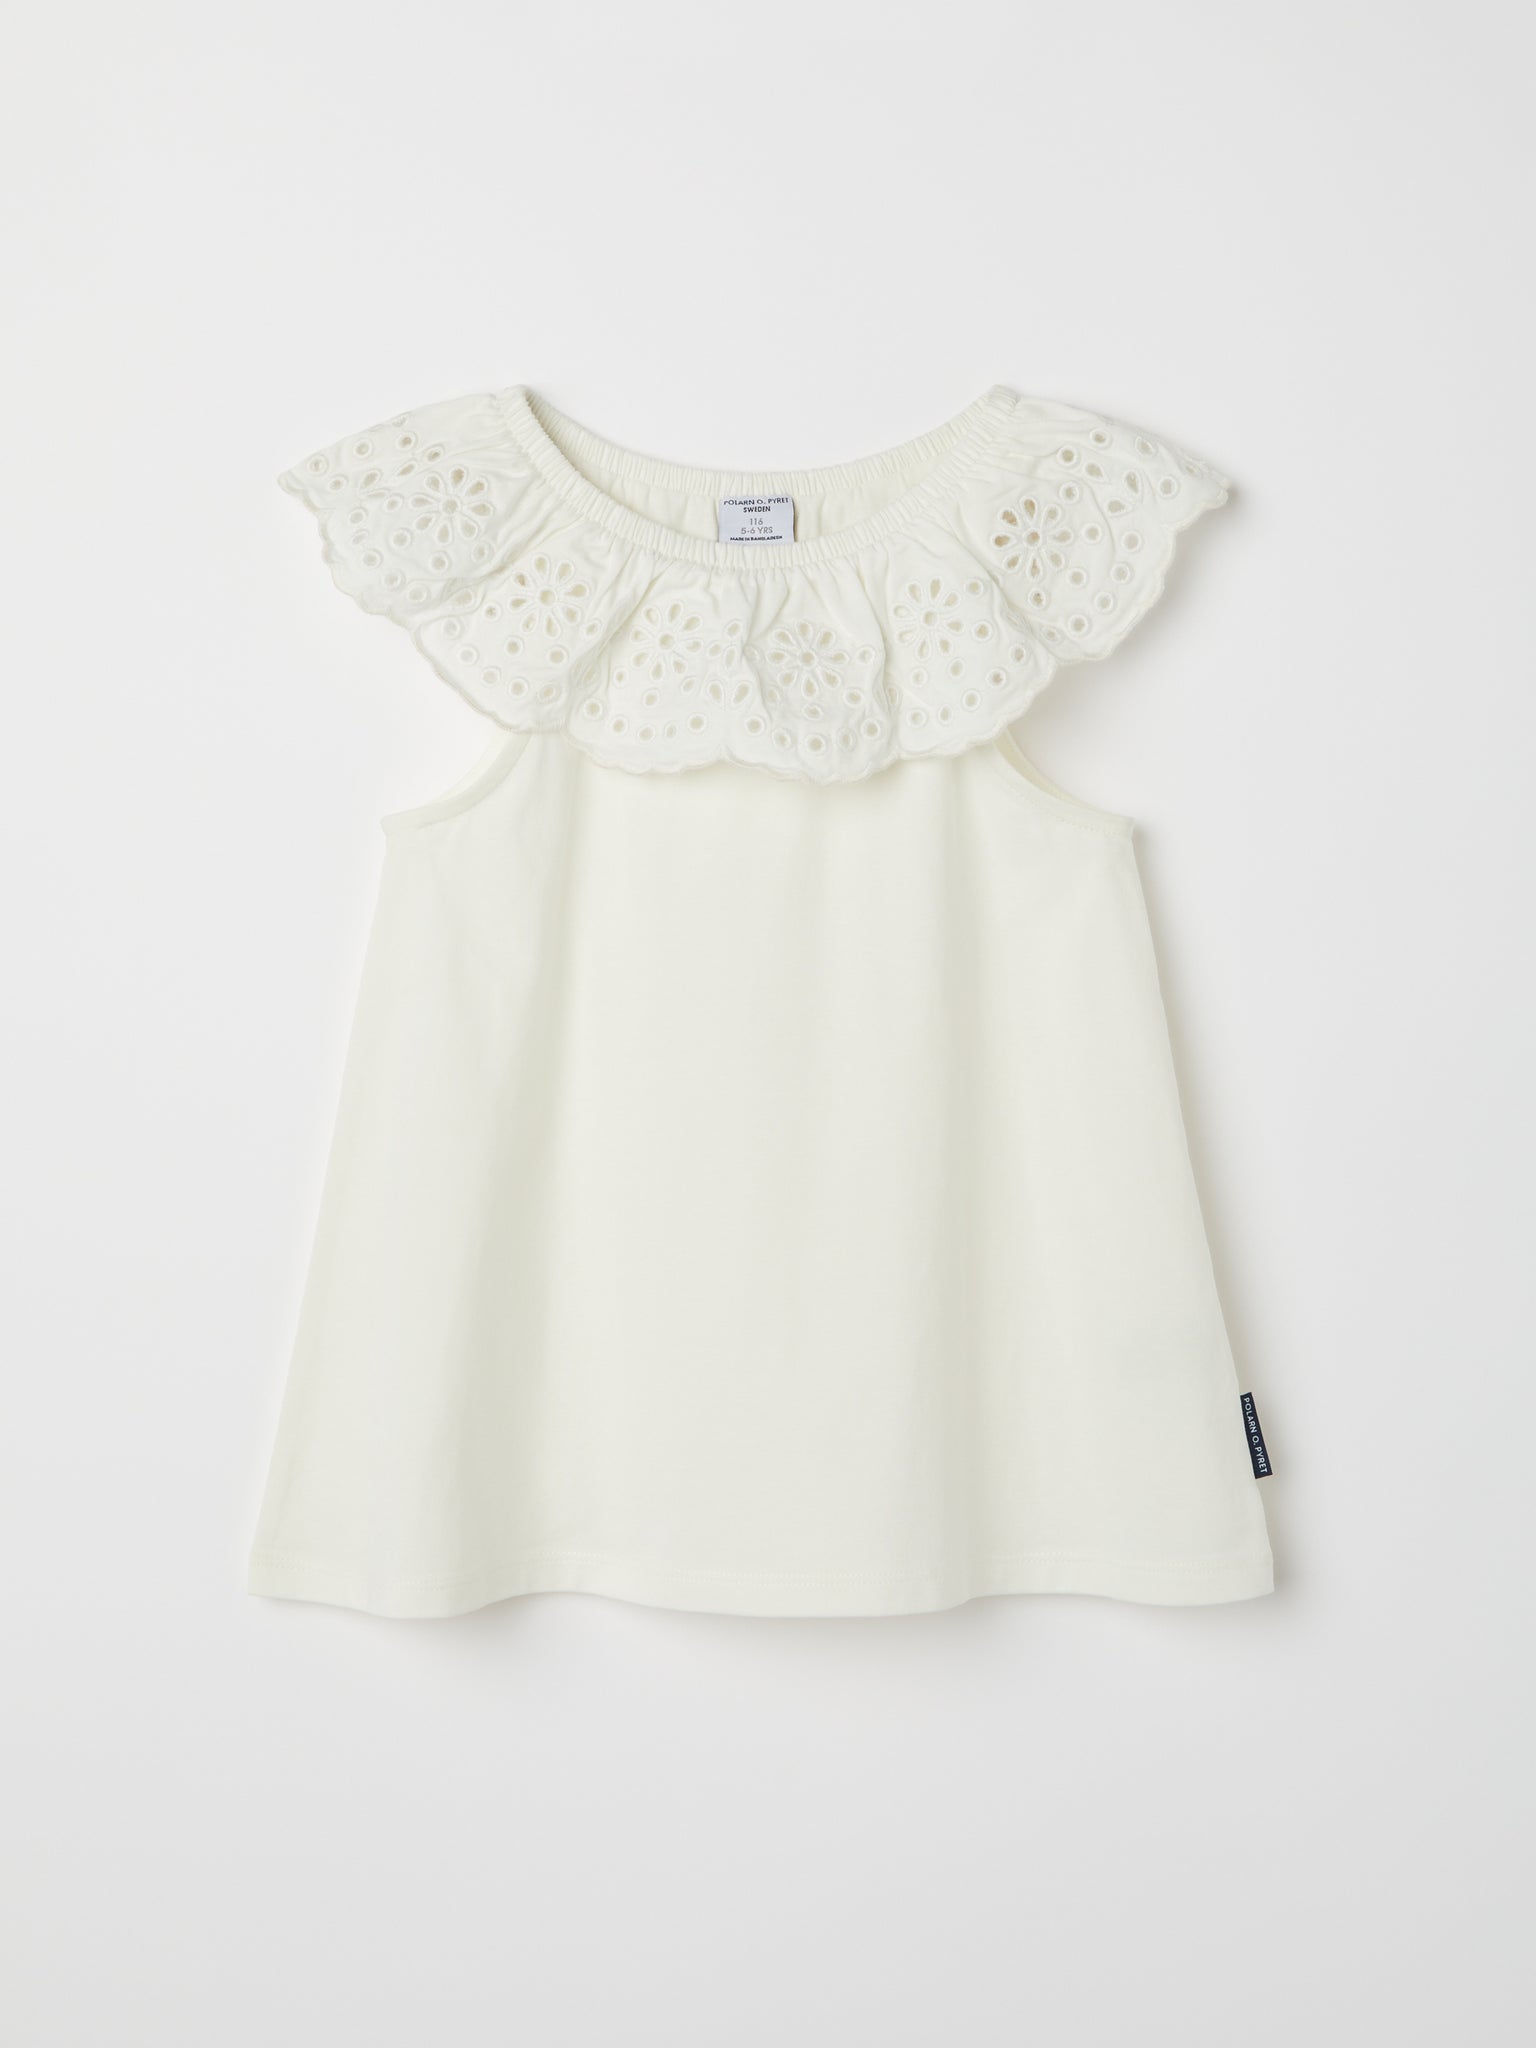 White Embroidered Kids Top from the Polarn O. Pyret kidswear collection. Nordic kids clothes made from sustainable sources.